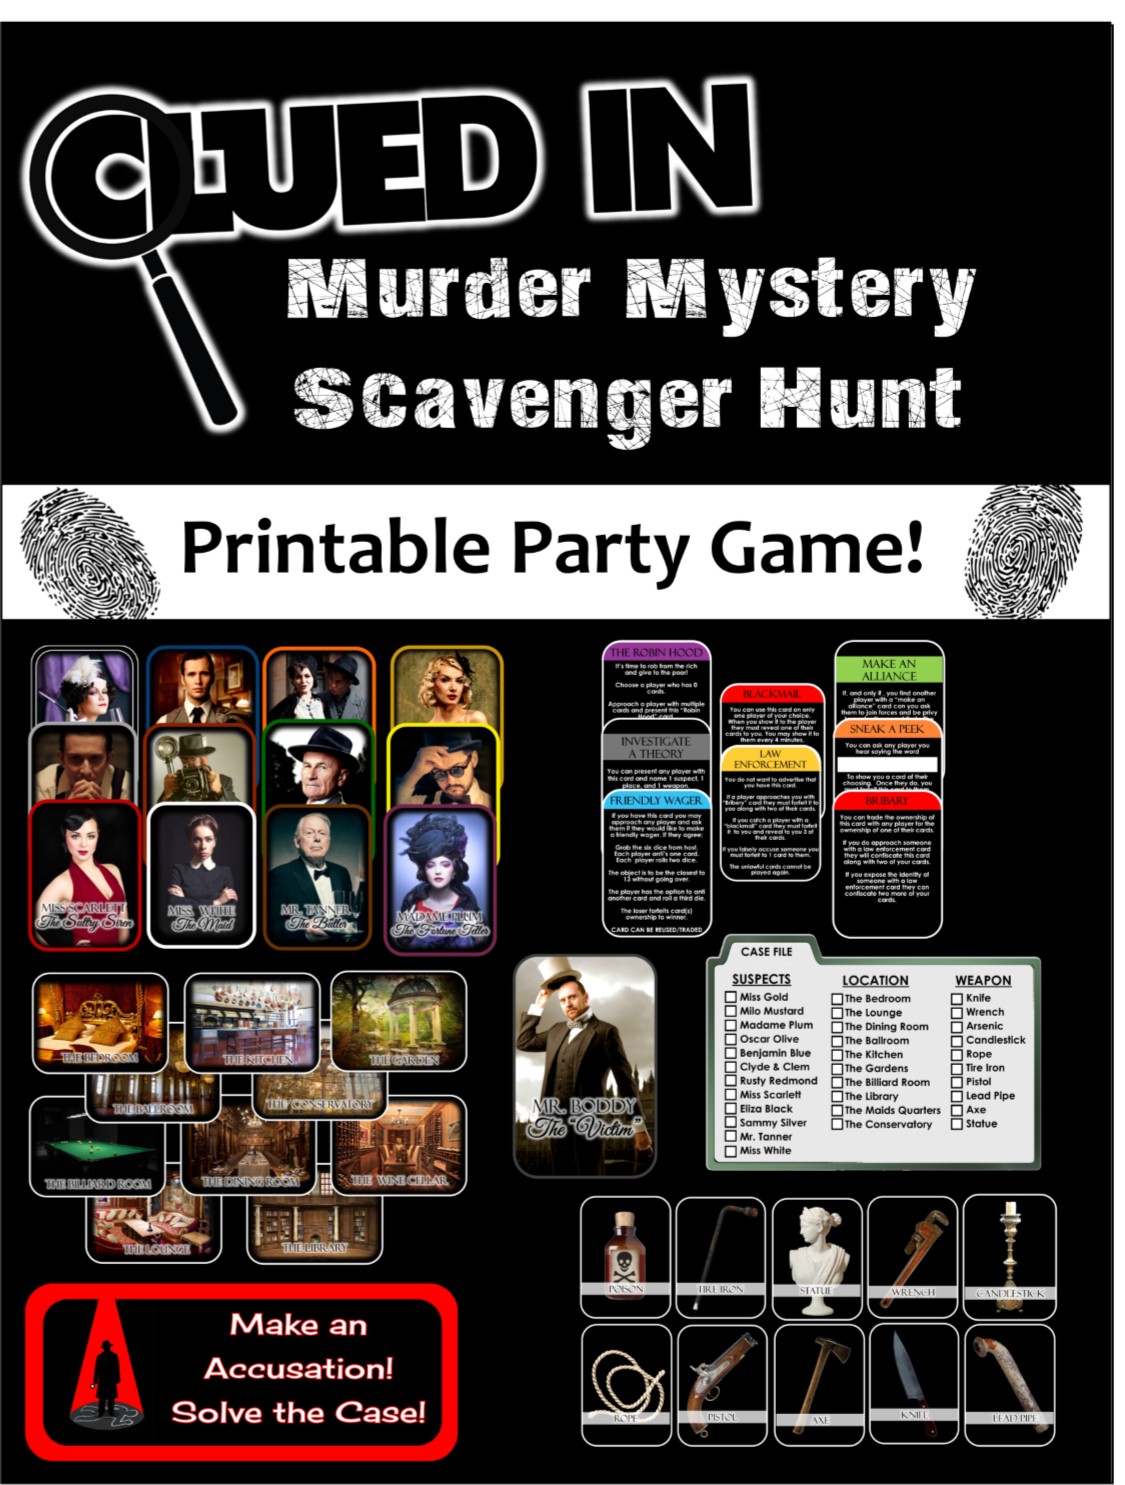 Clued In Murder Mystery Scavenger Hunt Printable Party Game Inspired By Clue